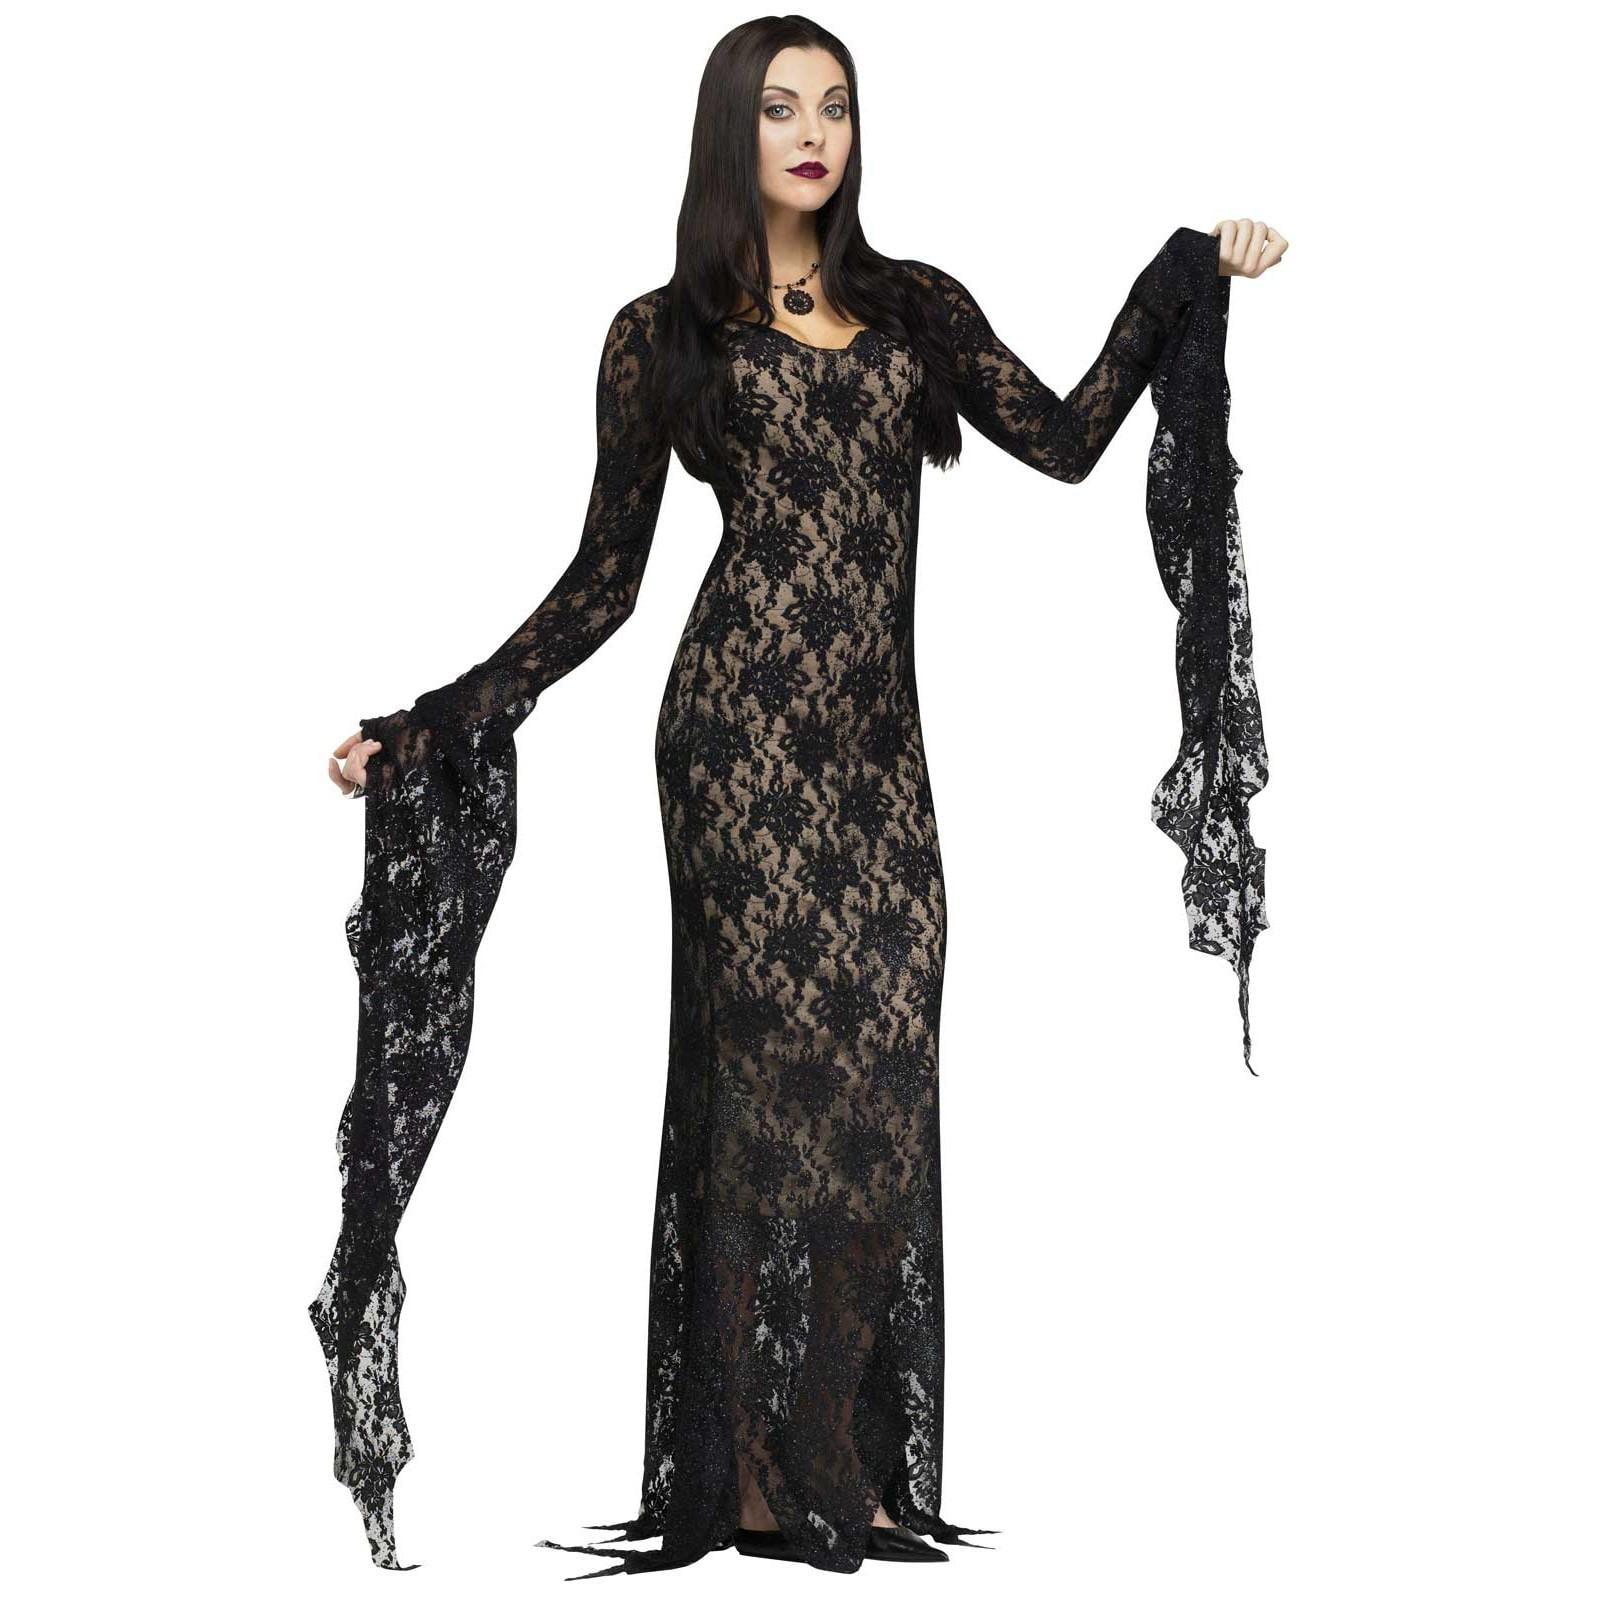 Ladies Morticia Addams Costume Adams Family Fancy Dress Halloween Womens Outfit 